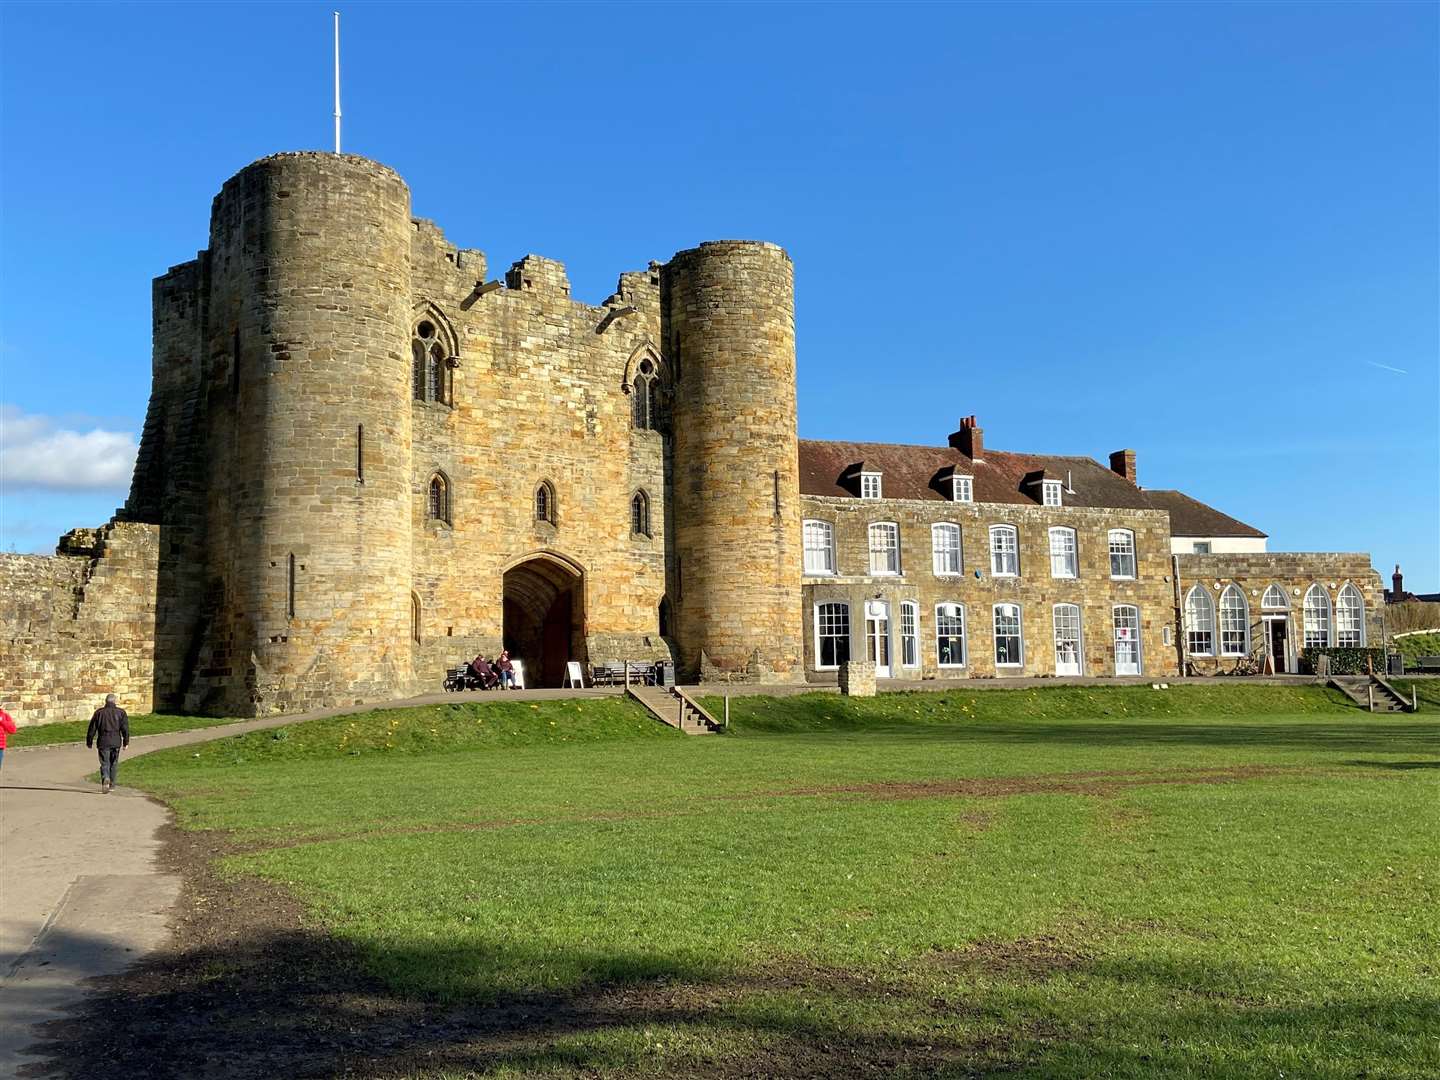 The temporary Post Office has opened at Tonbridge Castle